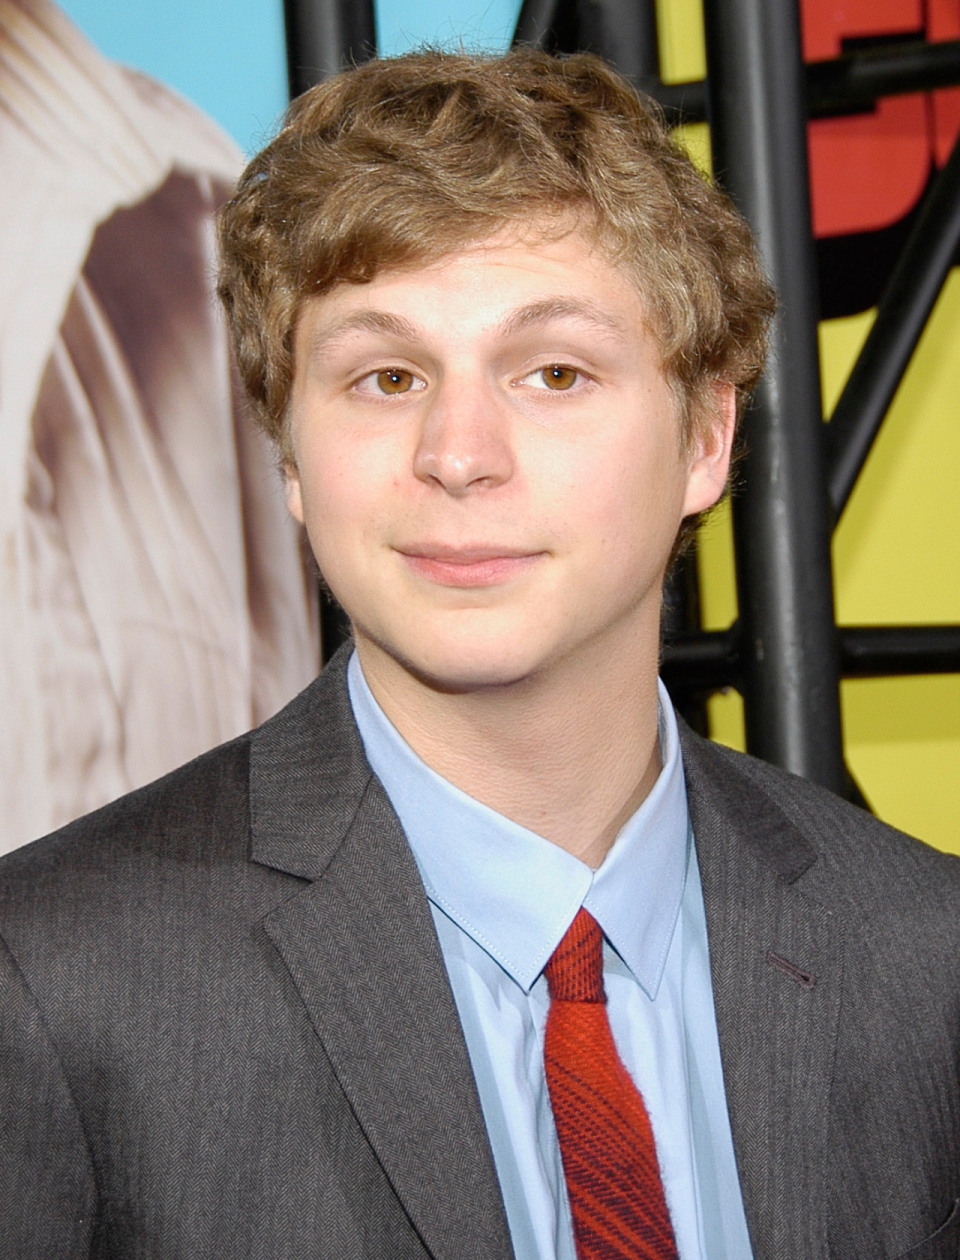 Michael Cera attends the Los Angeles premiere for Superbad